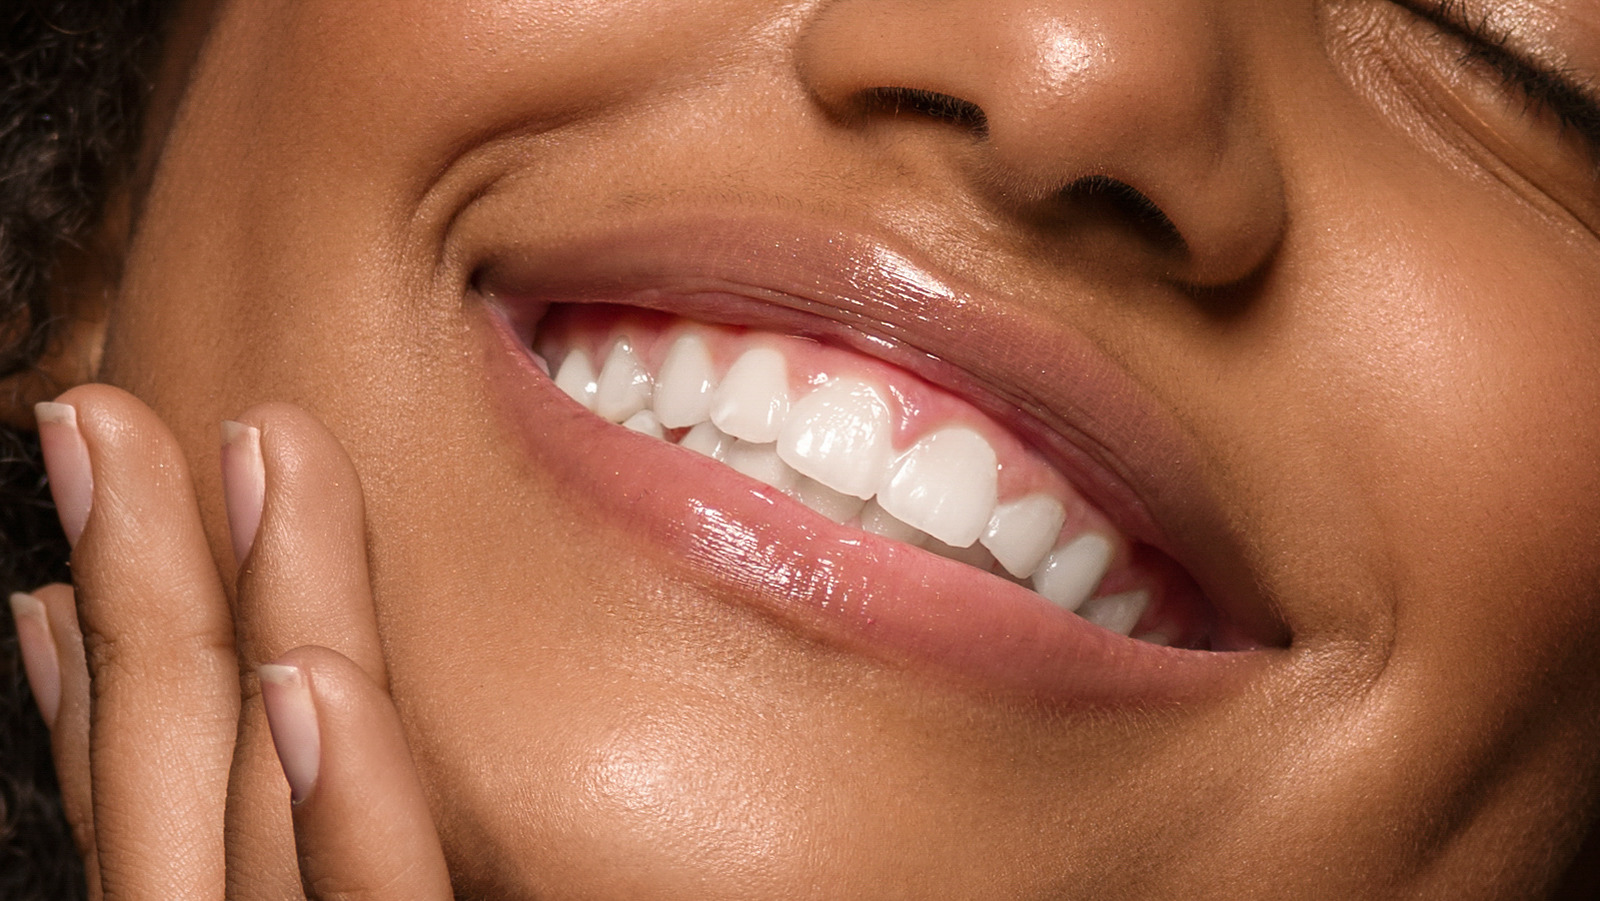 The Scientific Reason Teeth Are The Only Part Of The Body That Can't Heal  Themselves